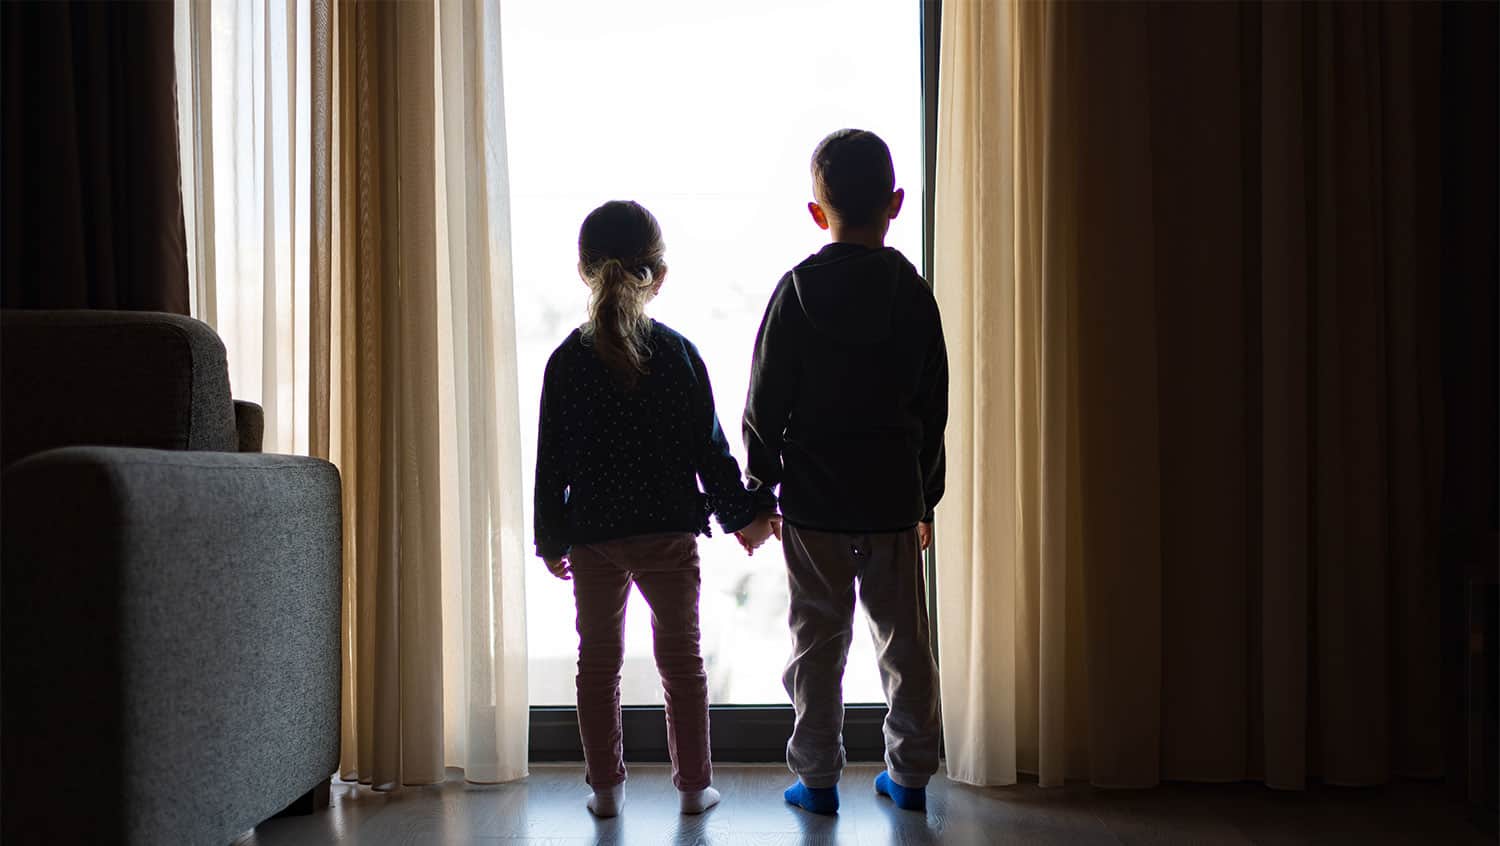 A young boy and girl stood by a window